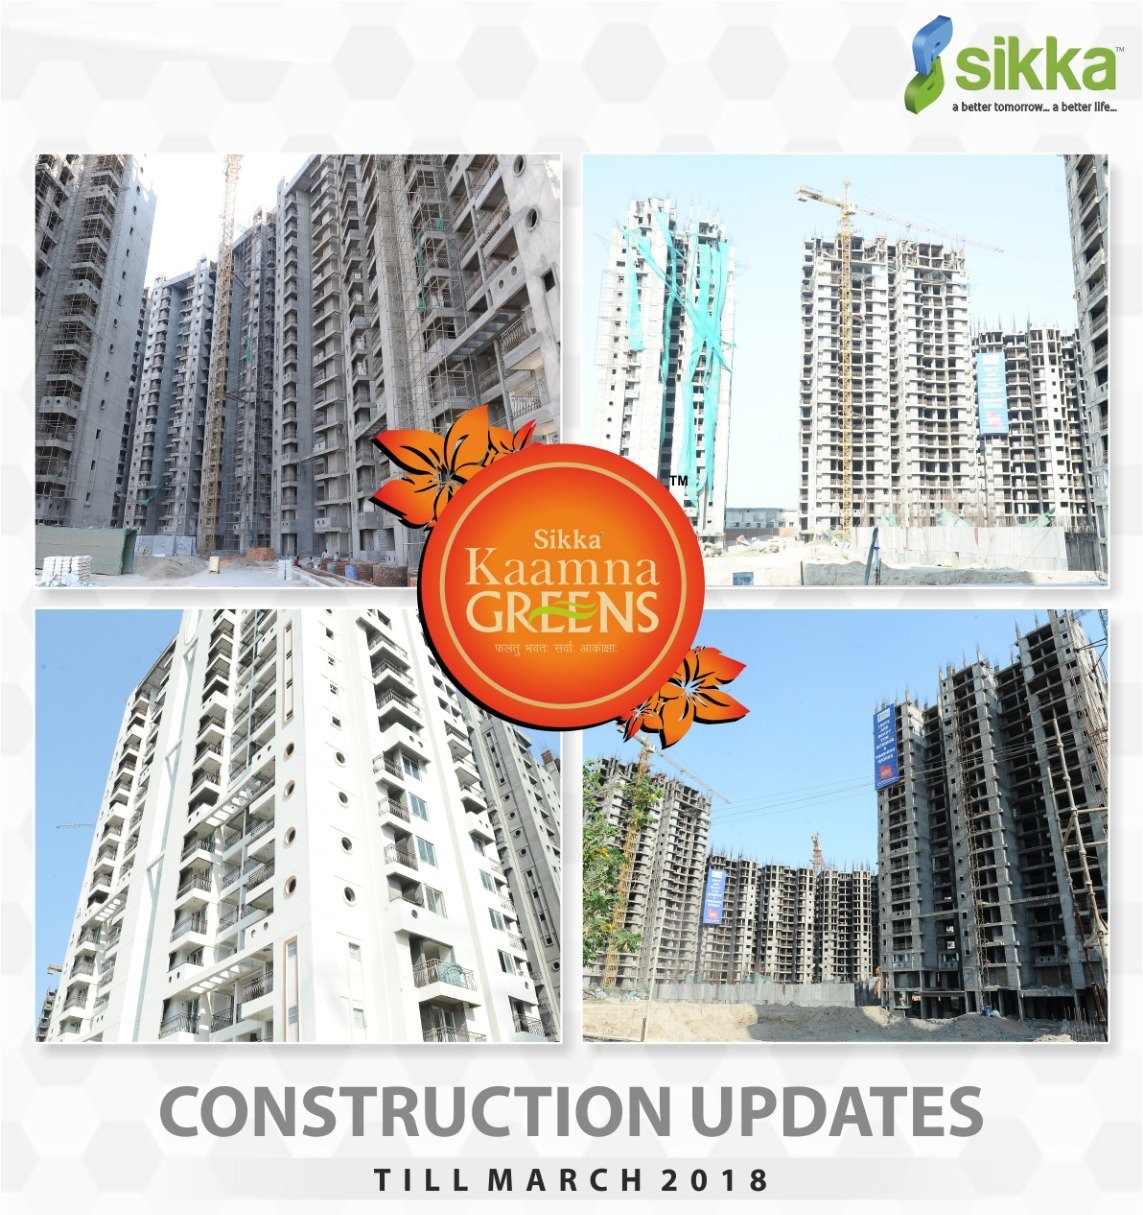 Construction updates of Sikka Kaamna Greens in Noida